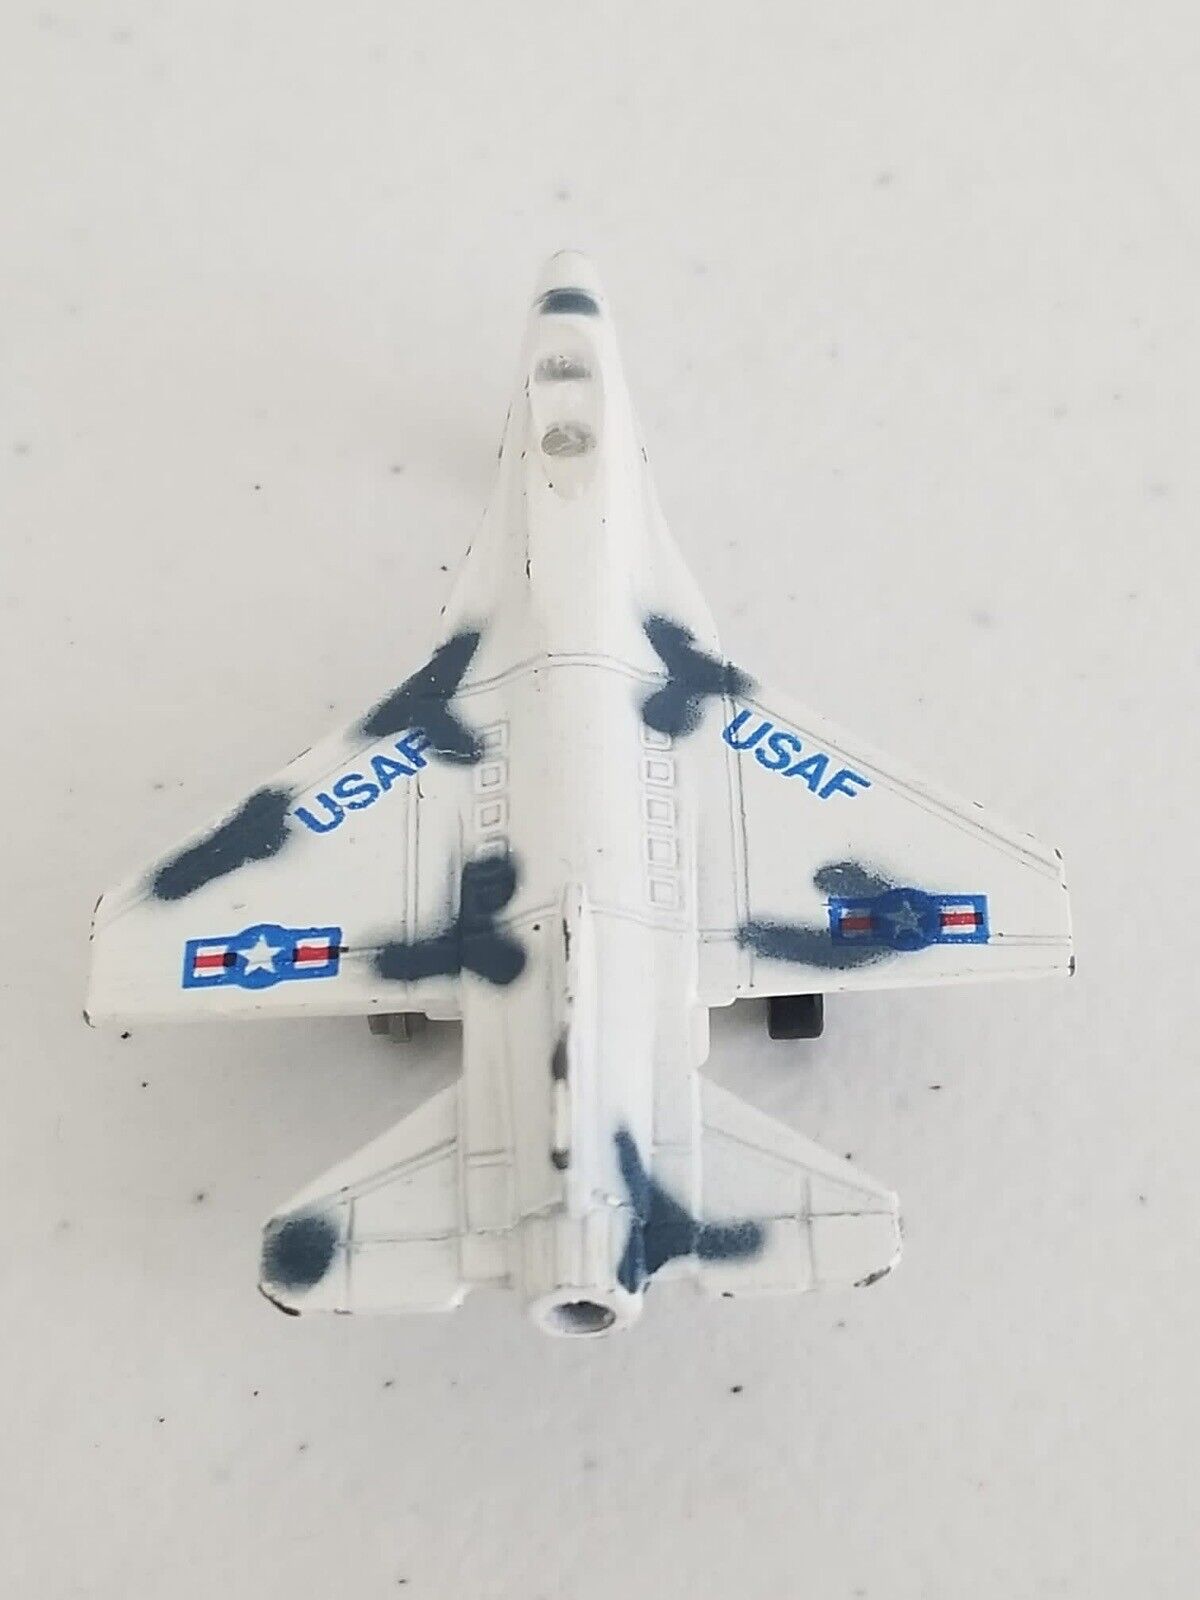 Rare Vintage Diecast Toy Vehicle Collection: Corgi, Esso F1, 'Vette 85, USAF Jet - Collectible and Iconic Miniatures - TreasuTiques